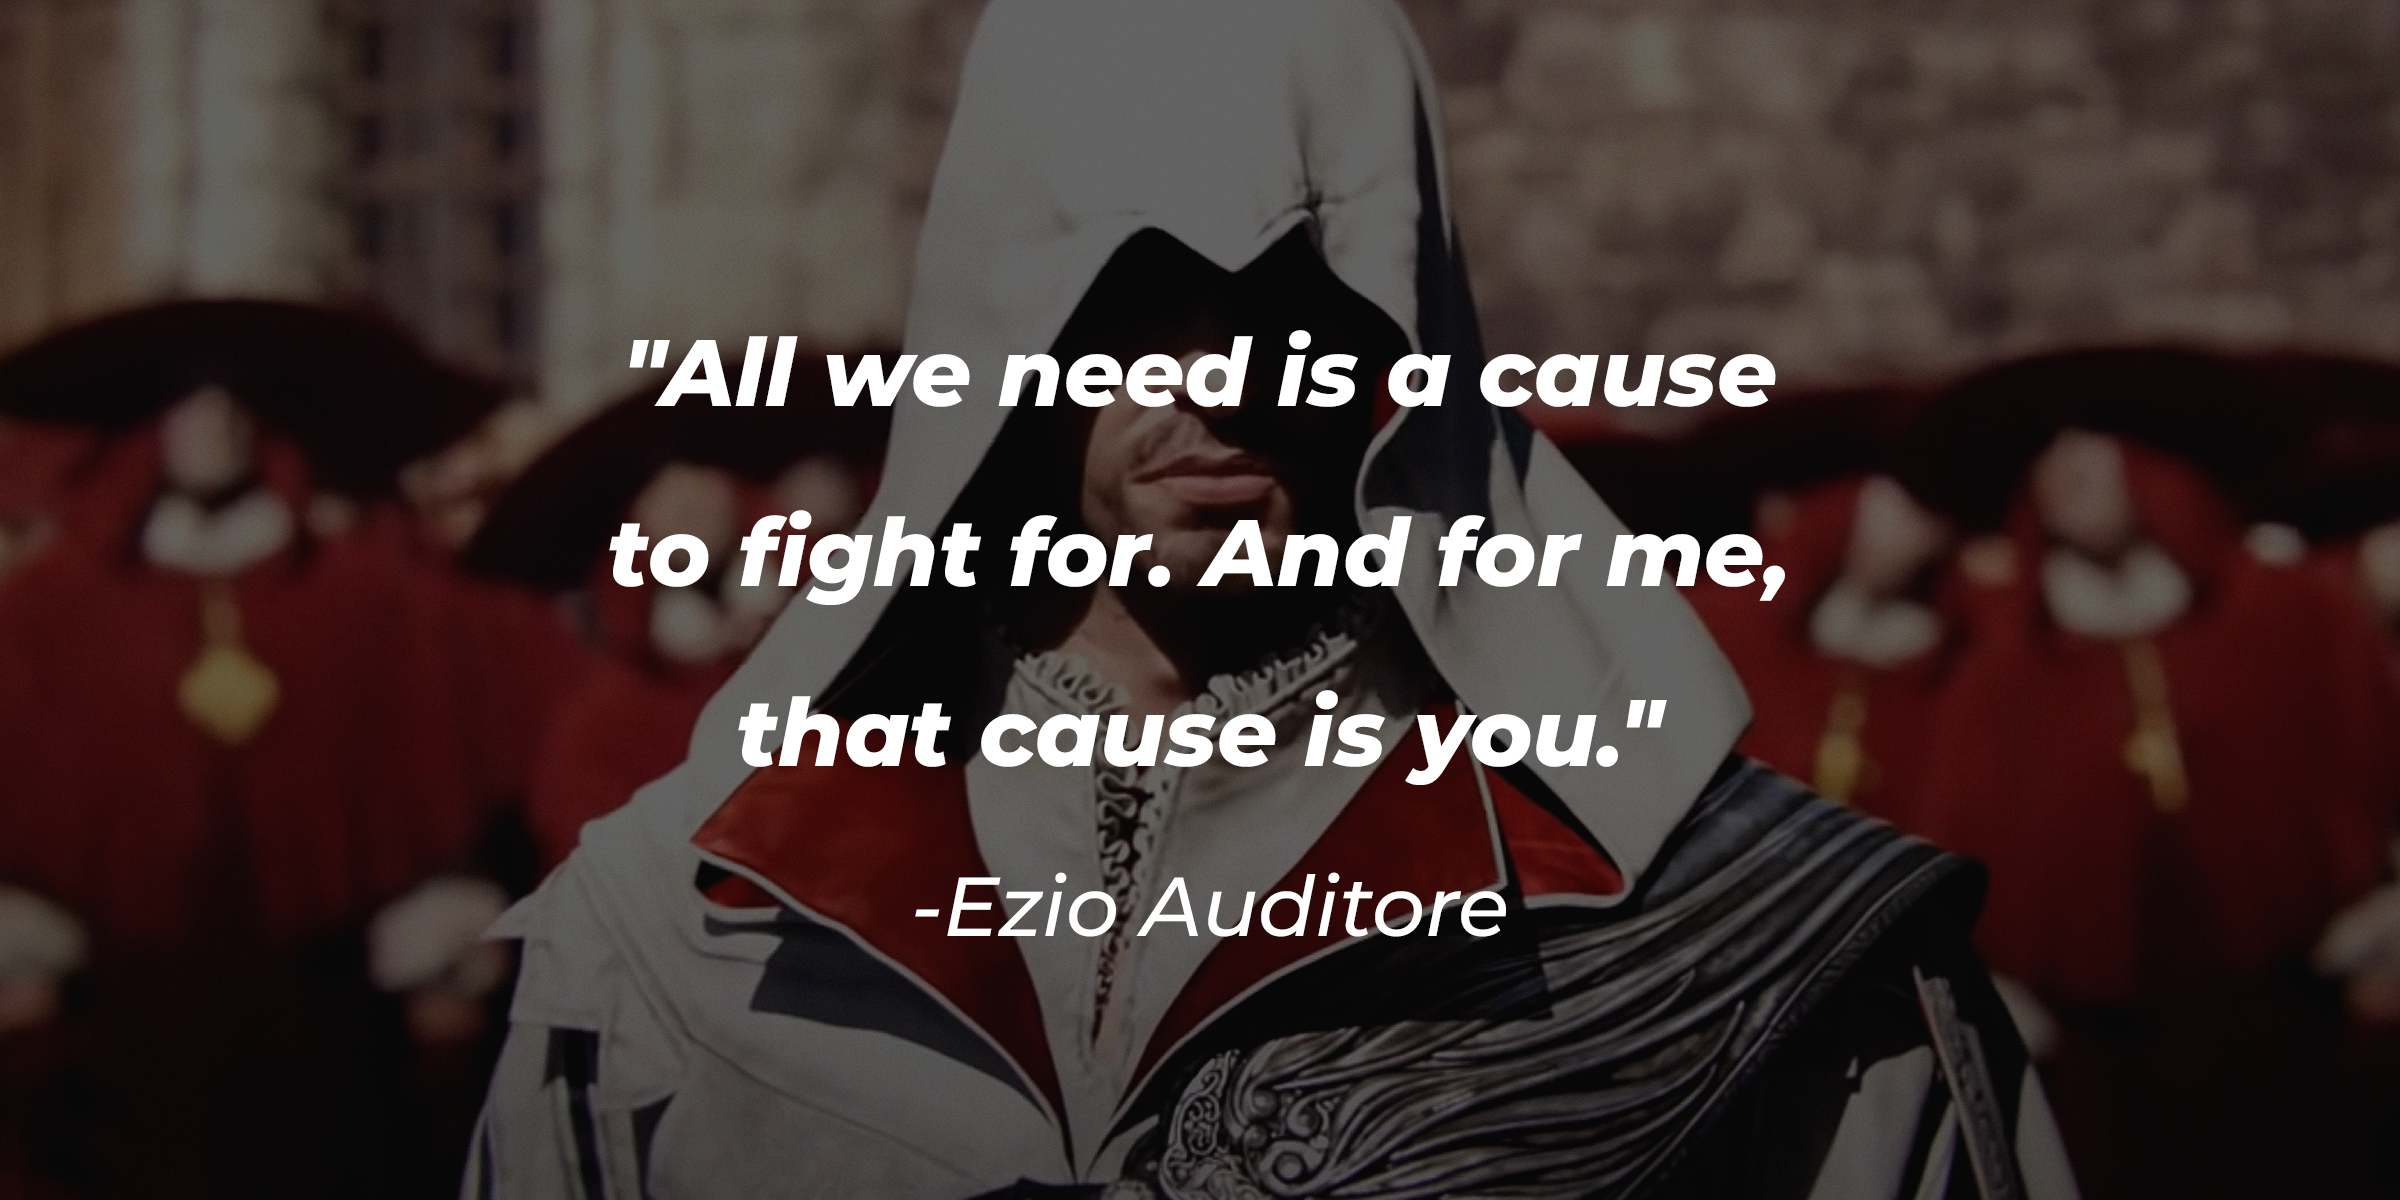 A photo of Enzo Auditore with Enzo Auditore's quote: "All we need is a cause to fight for. And for me, that cause is you." | Source: youtube.com/UbisoftNA